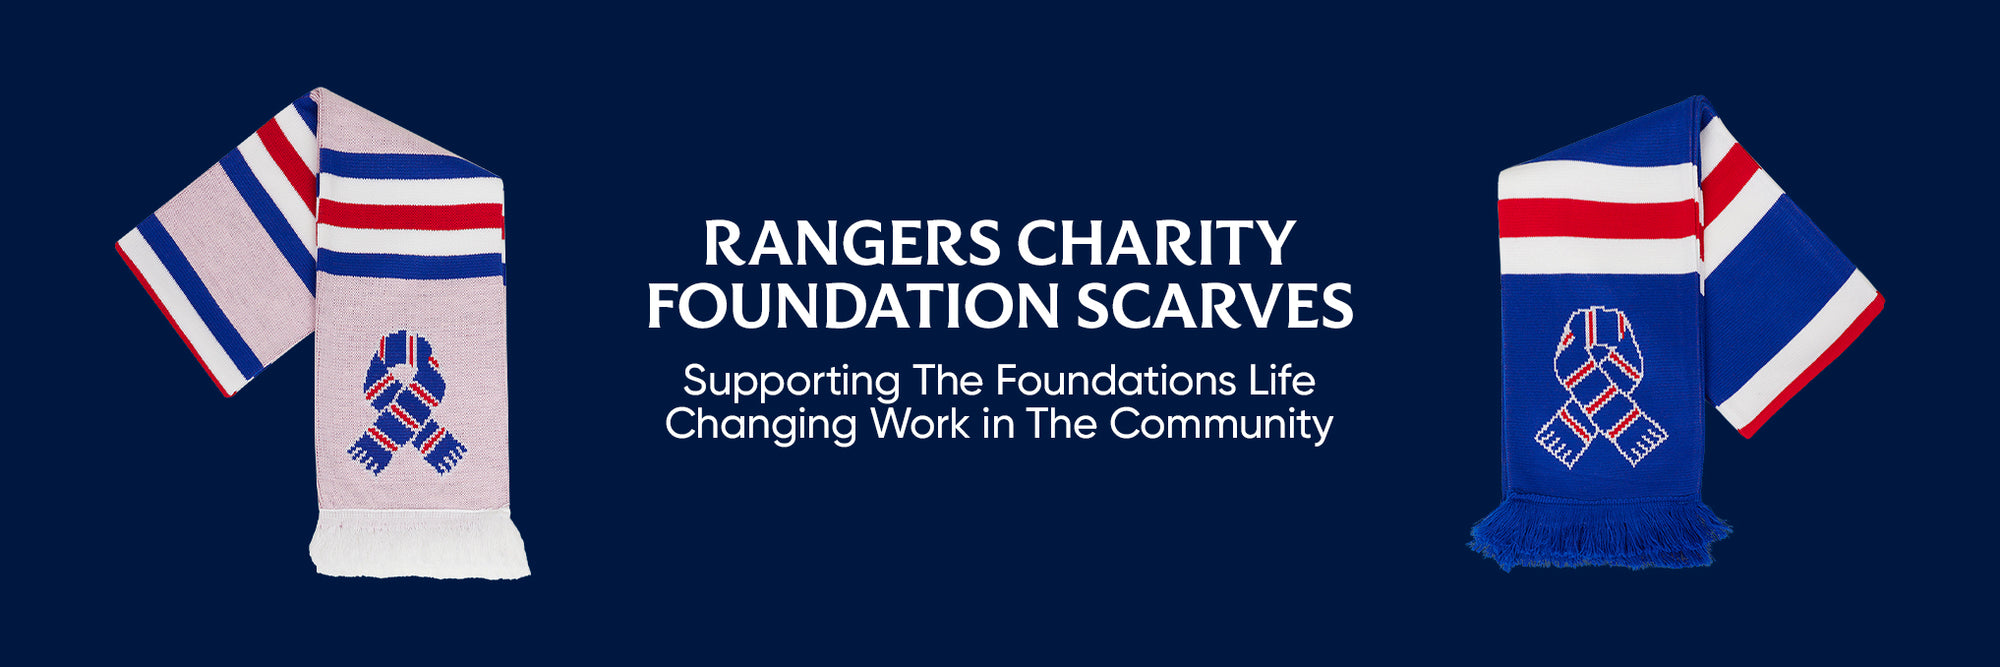 Charity Foundation Scarves